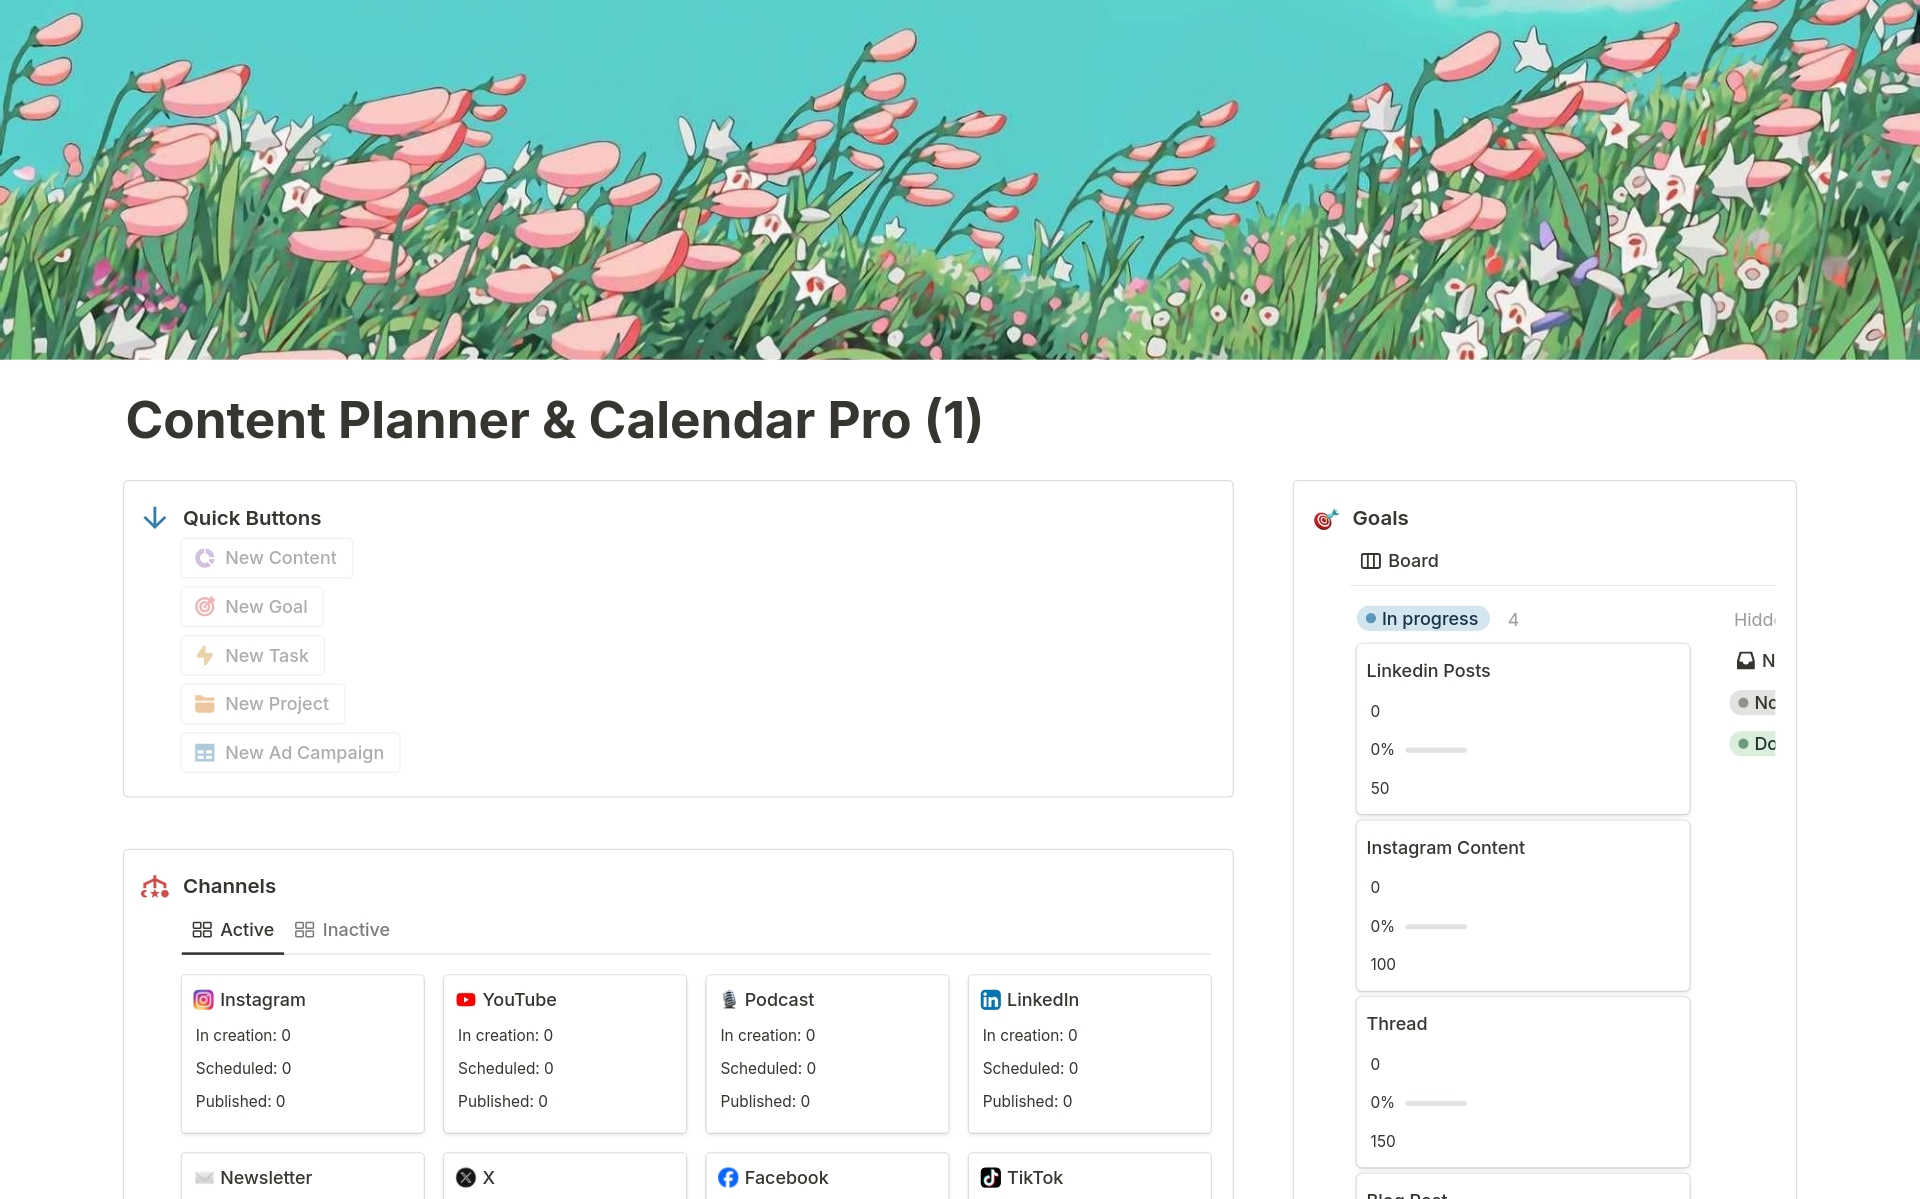 Tired of juggling content across platforms? Introducing the Ultimate Content Planner & Calendar - your one-stop shop to plan, manage, and dominate content creation!  Discover powerful features to skyrocket your content game and conquer the world, one post at a time.